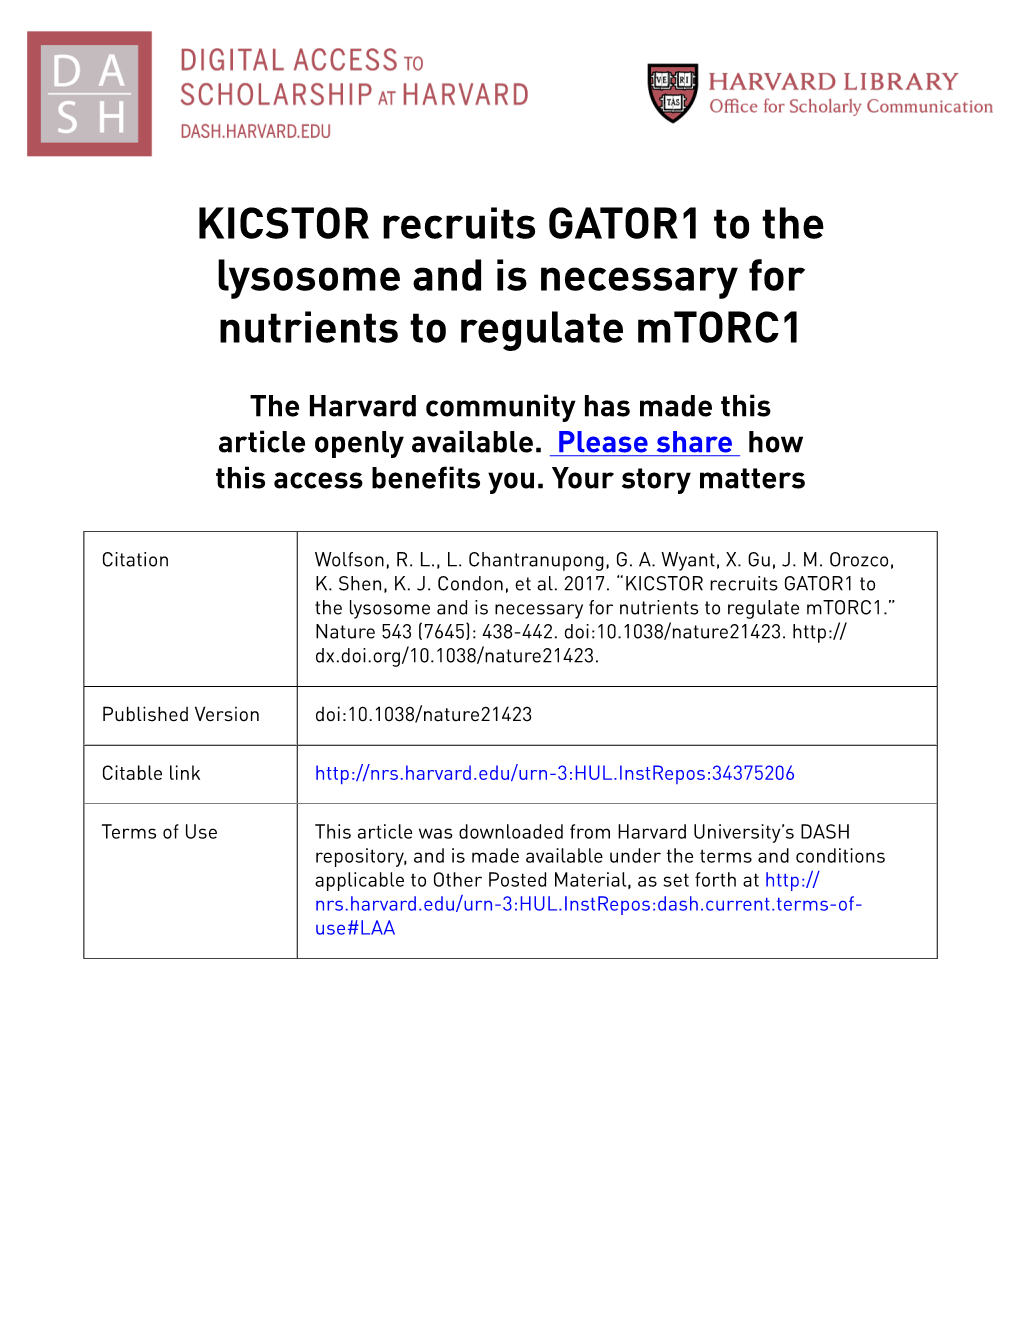 KICSTOR Recruits GATOR1 to the Lysosome and Is Necessary for Nutrients to Regulate Mtorc1